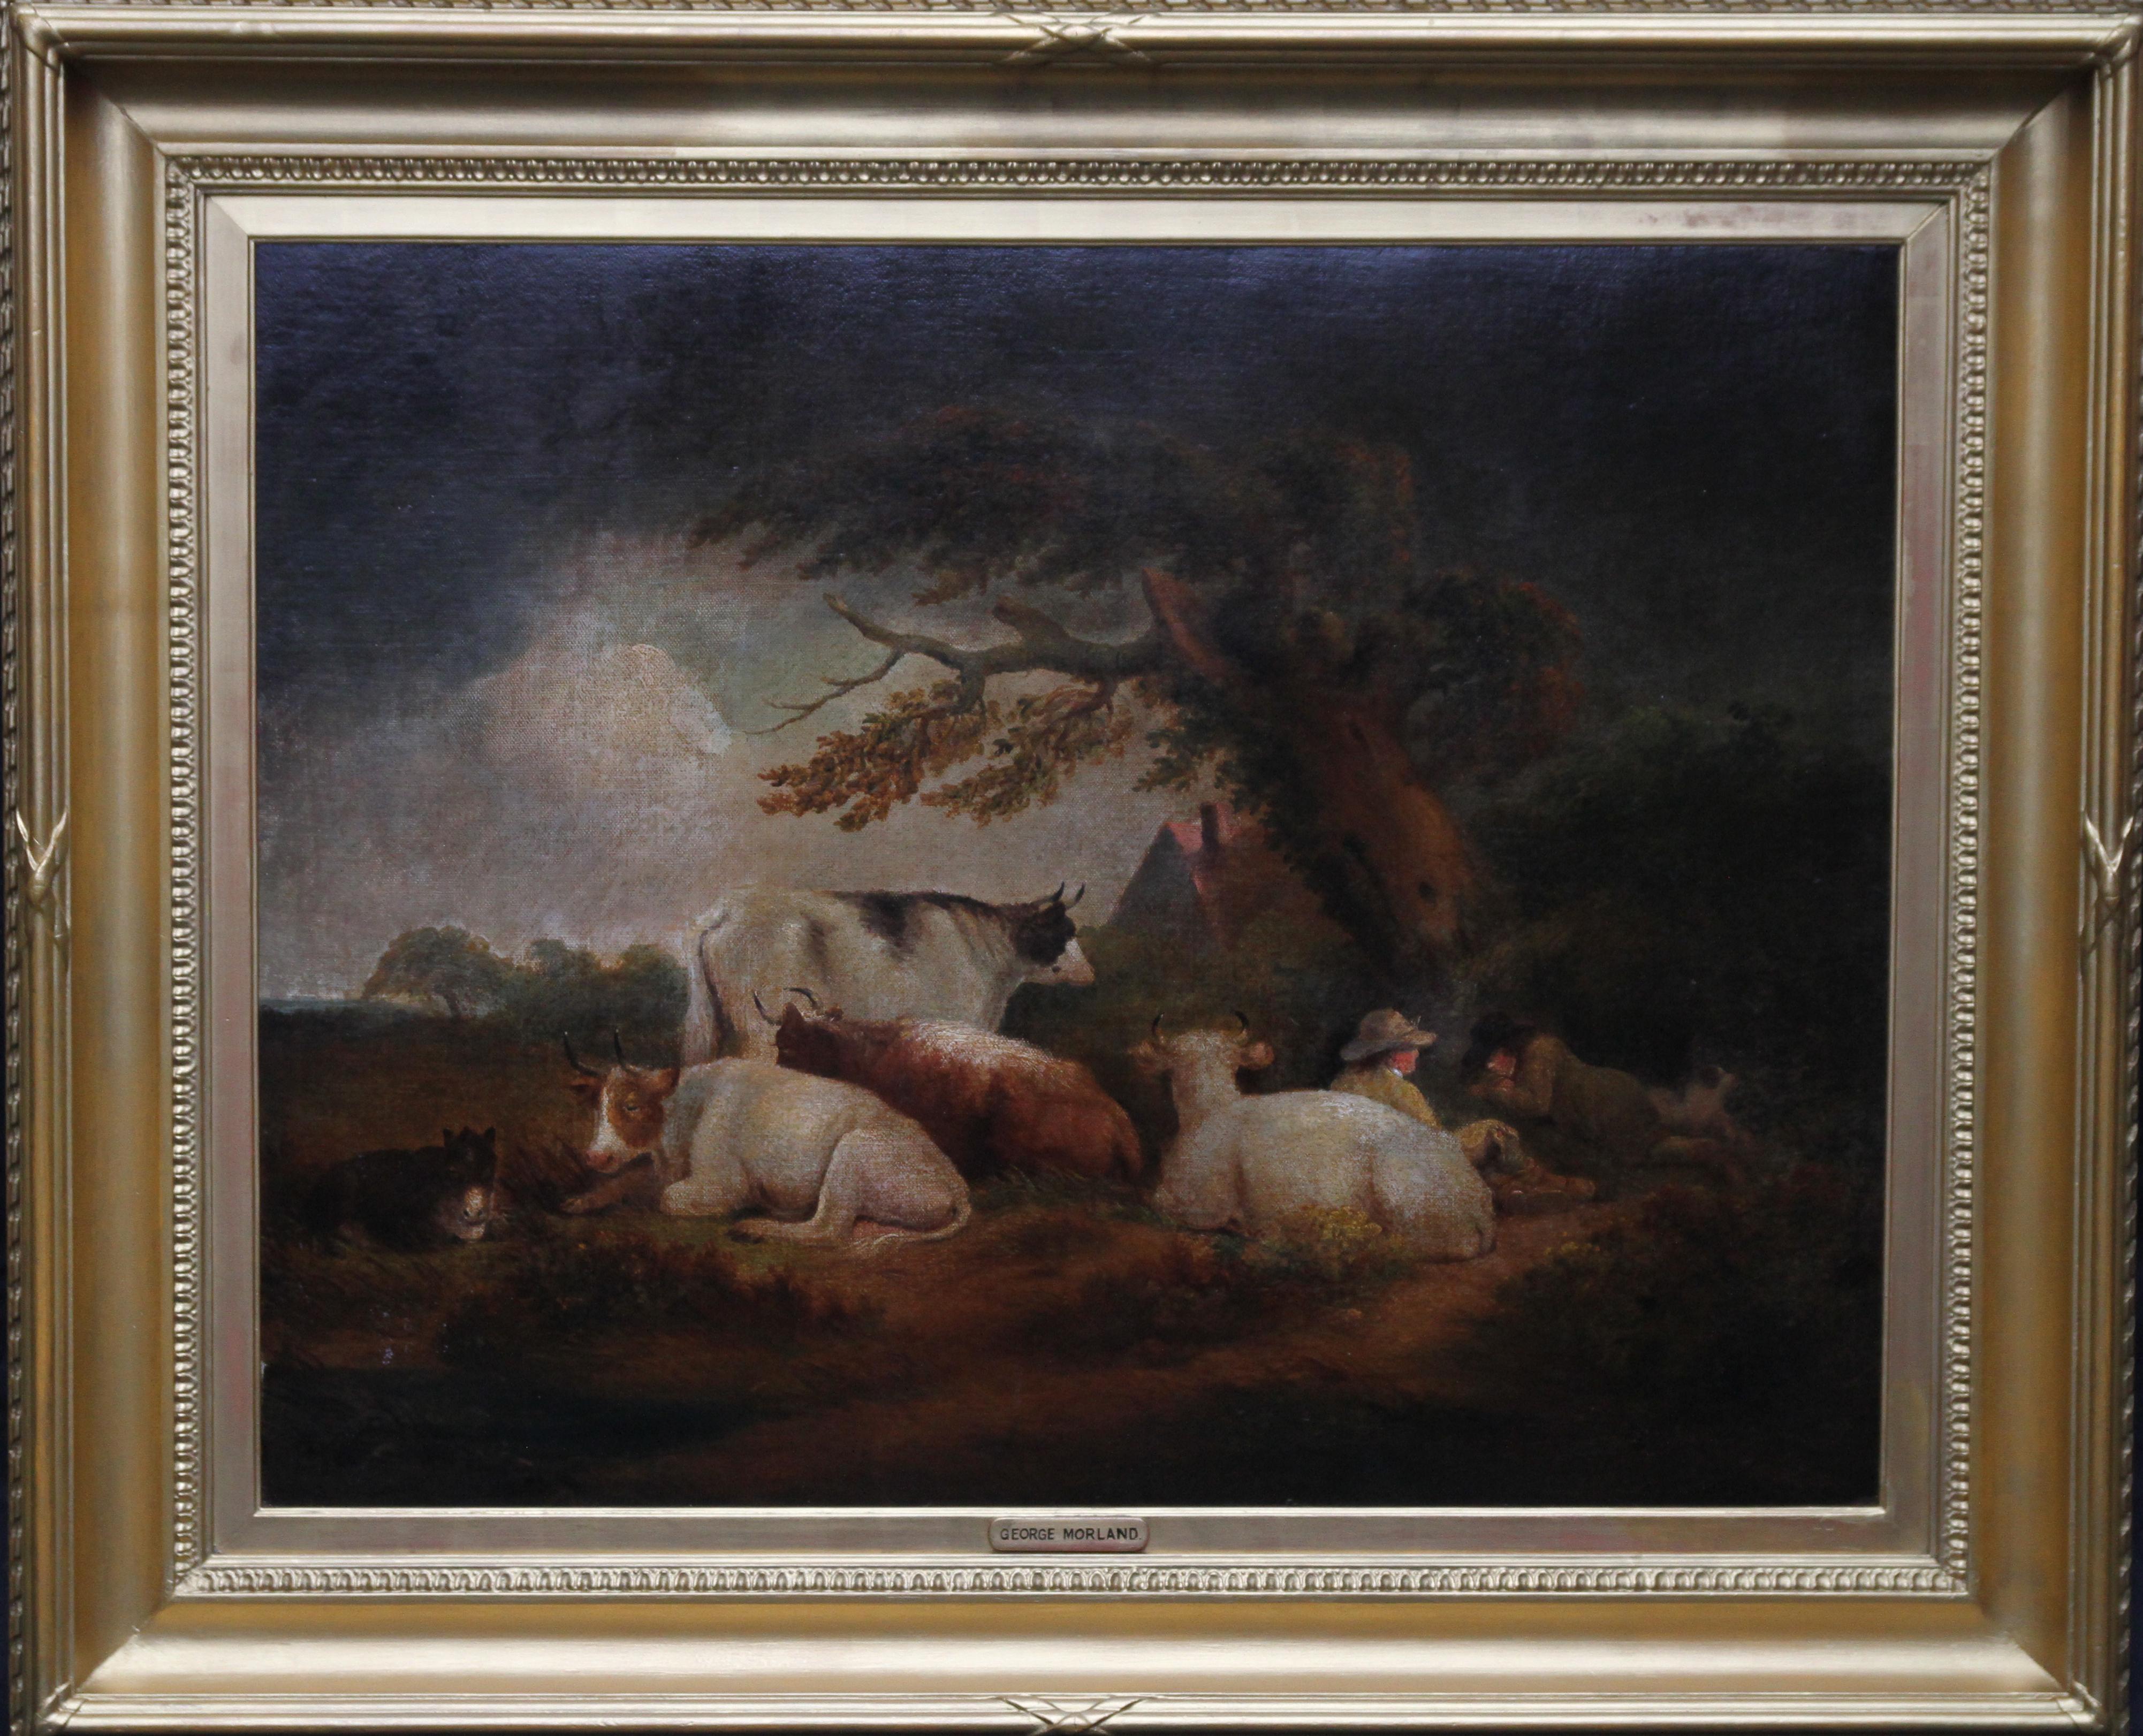 Cattle at Rest in a Landscape - British 18th century art pastoral oil painting 2